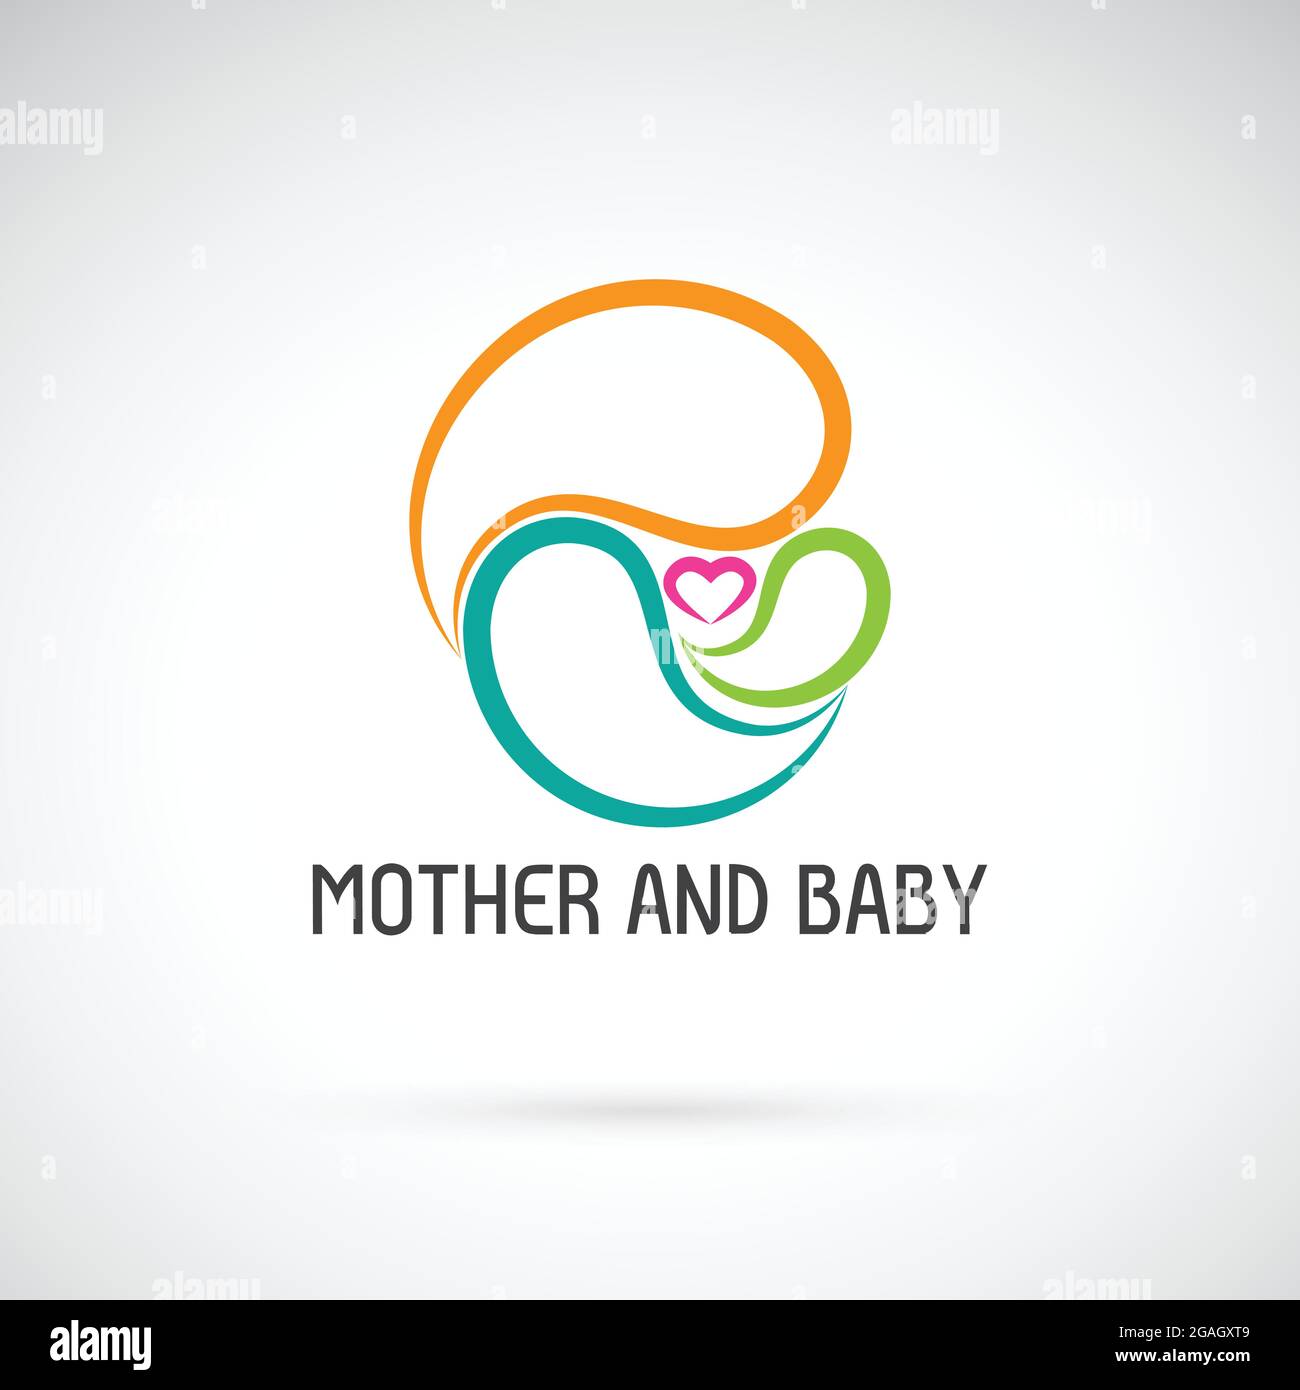 Vector icon of mother and baby design. Expression of love. Easy editable layered vector illustration. Stock Vector